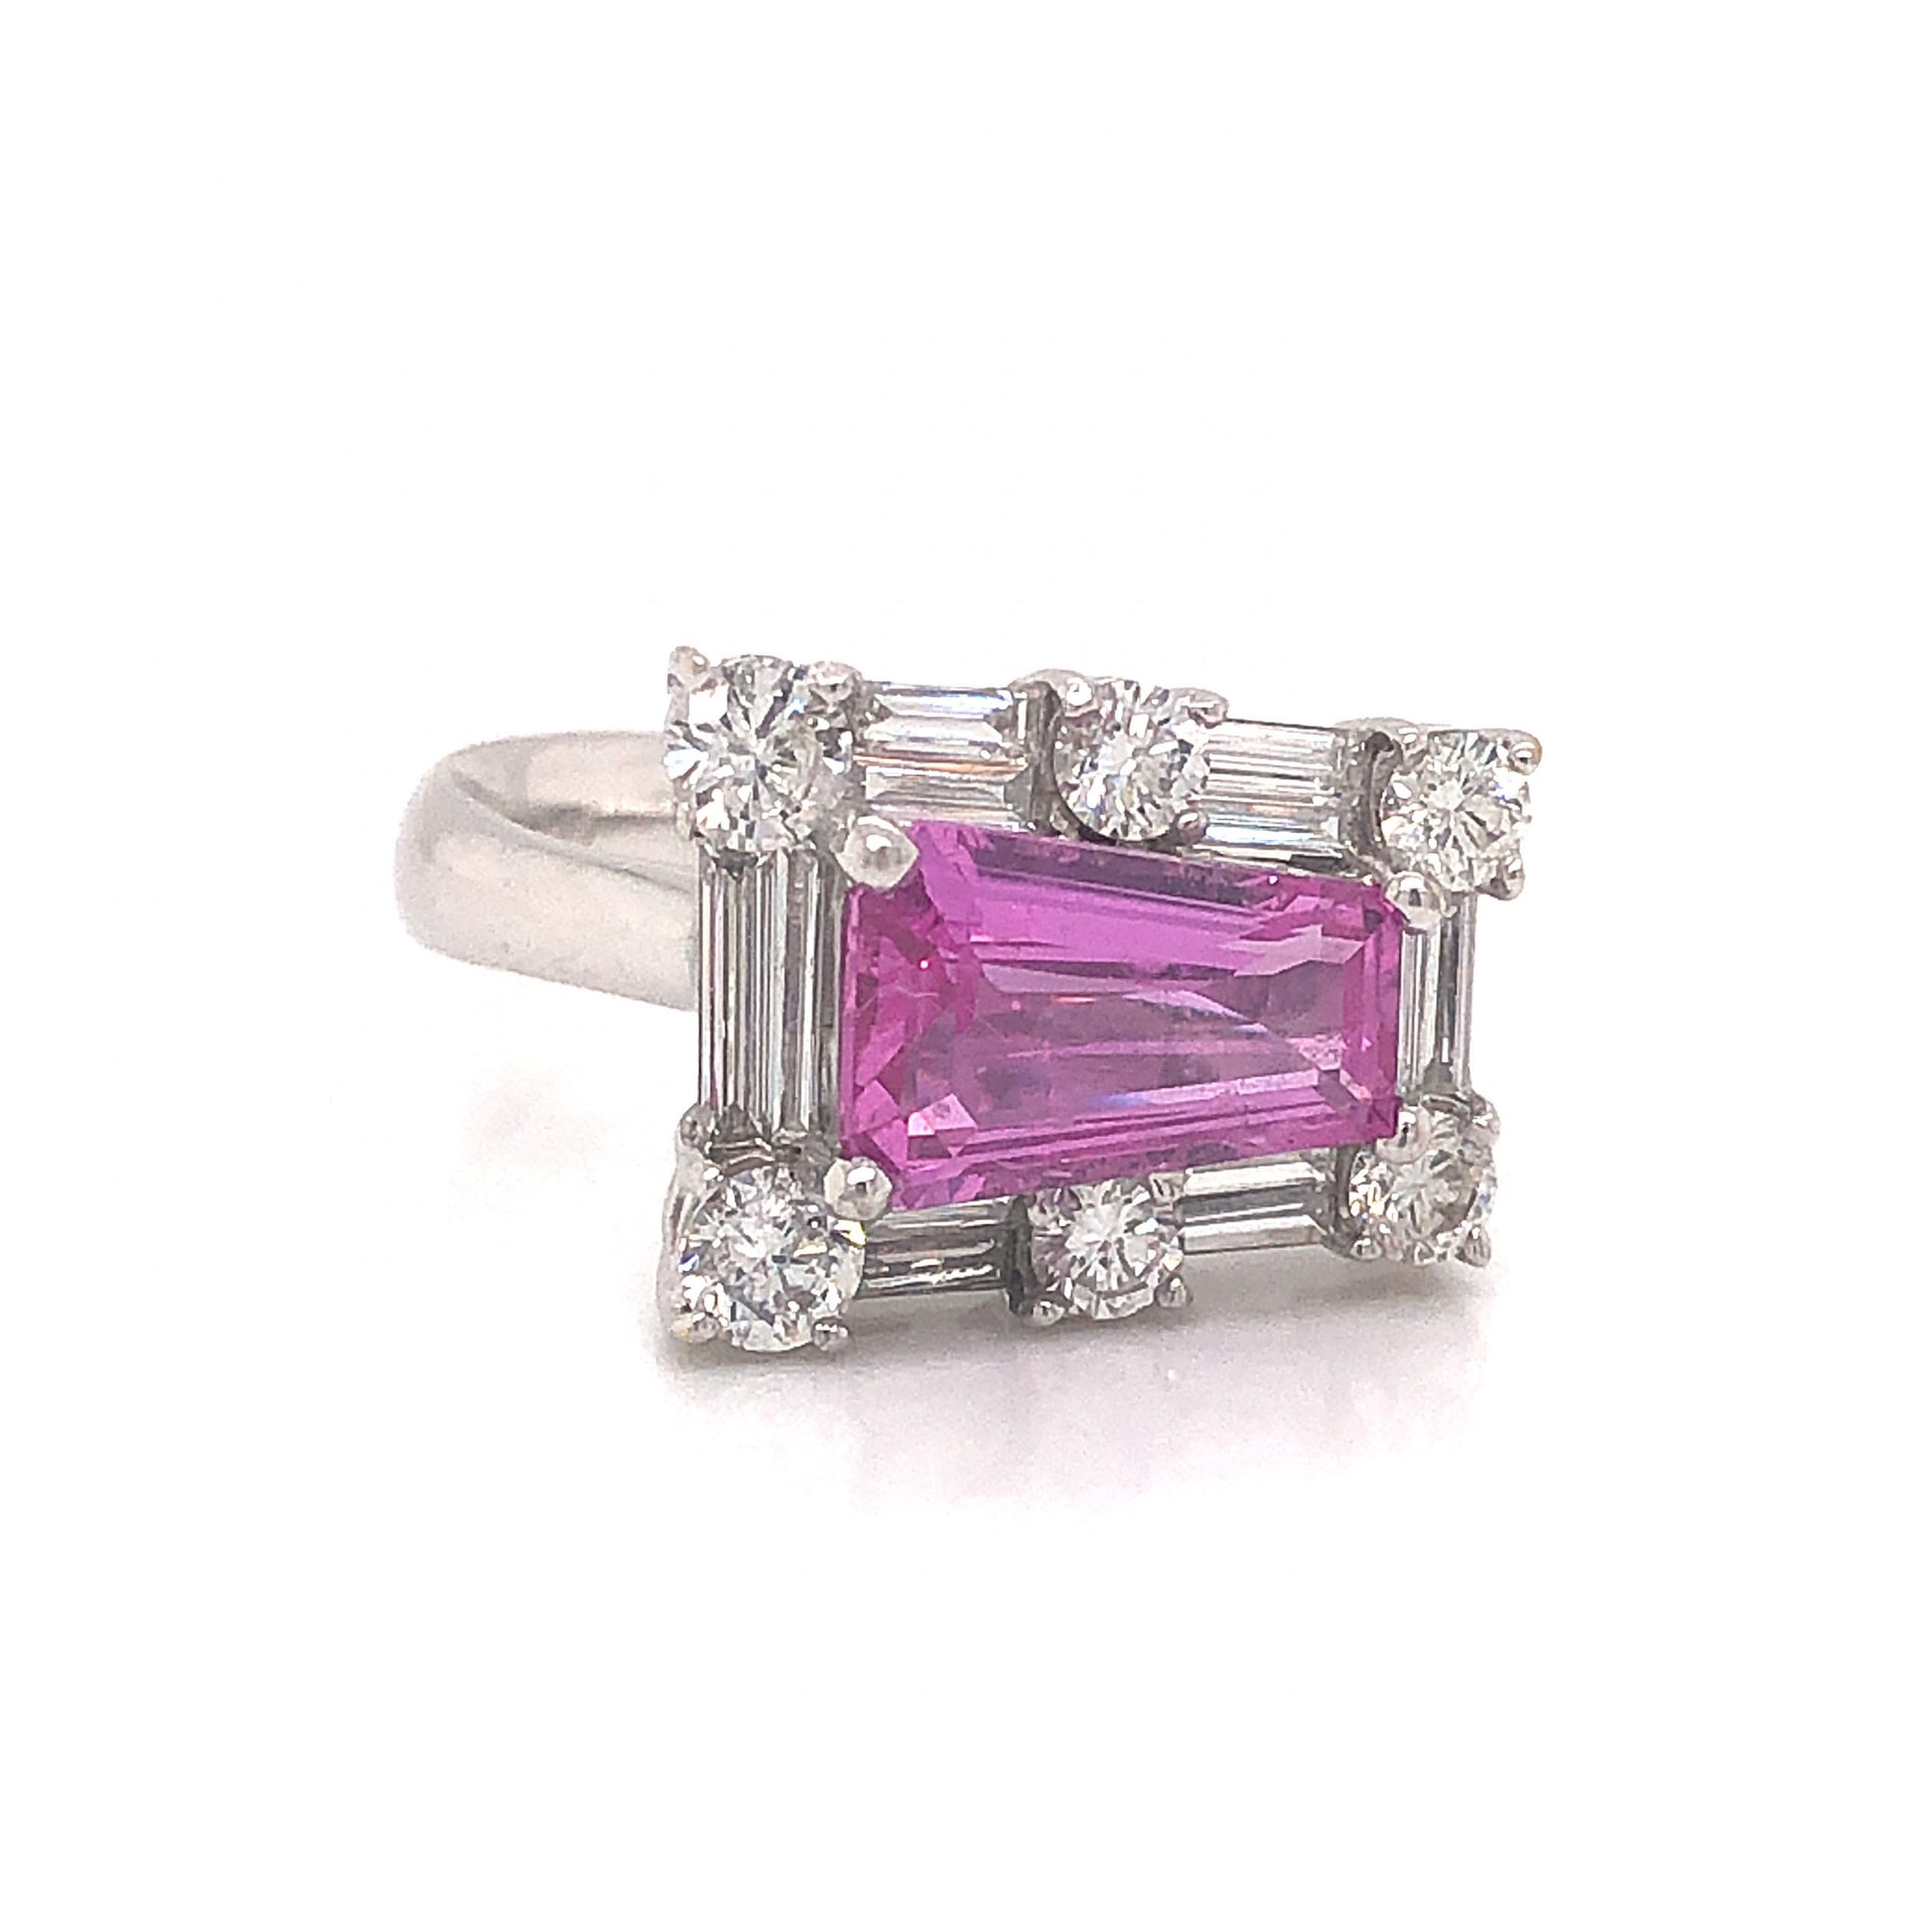 Pink Sapphire & Diamond Cocktail Ring in 18k White GoldComposition: 18 Karat White Gold Ring Size: 6 Total Diamond Weight: .63ct Total Gram Weight: 5.3 g Inscription: K18WG 1.86 D 0.63
      